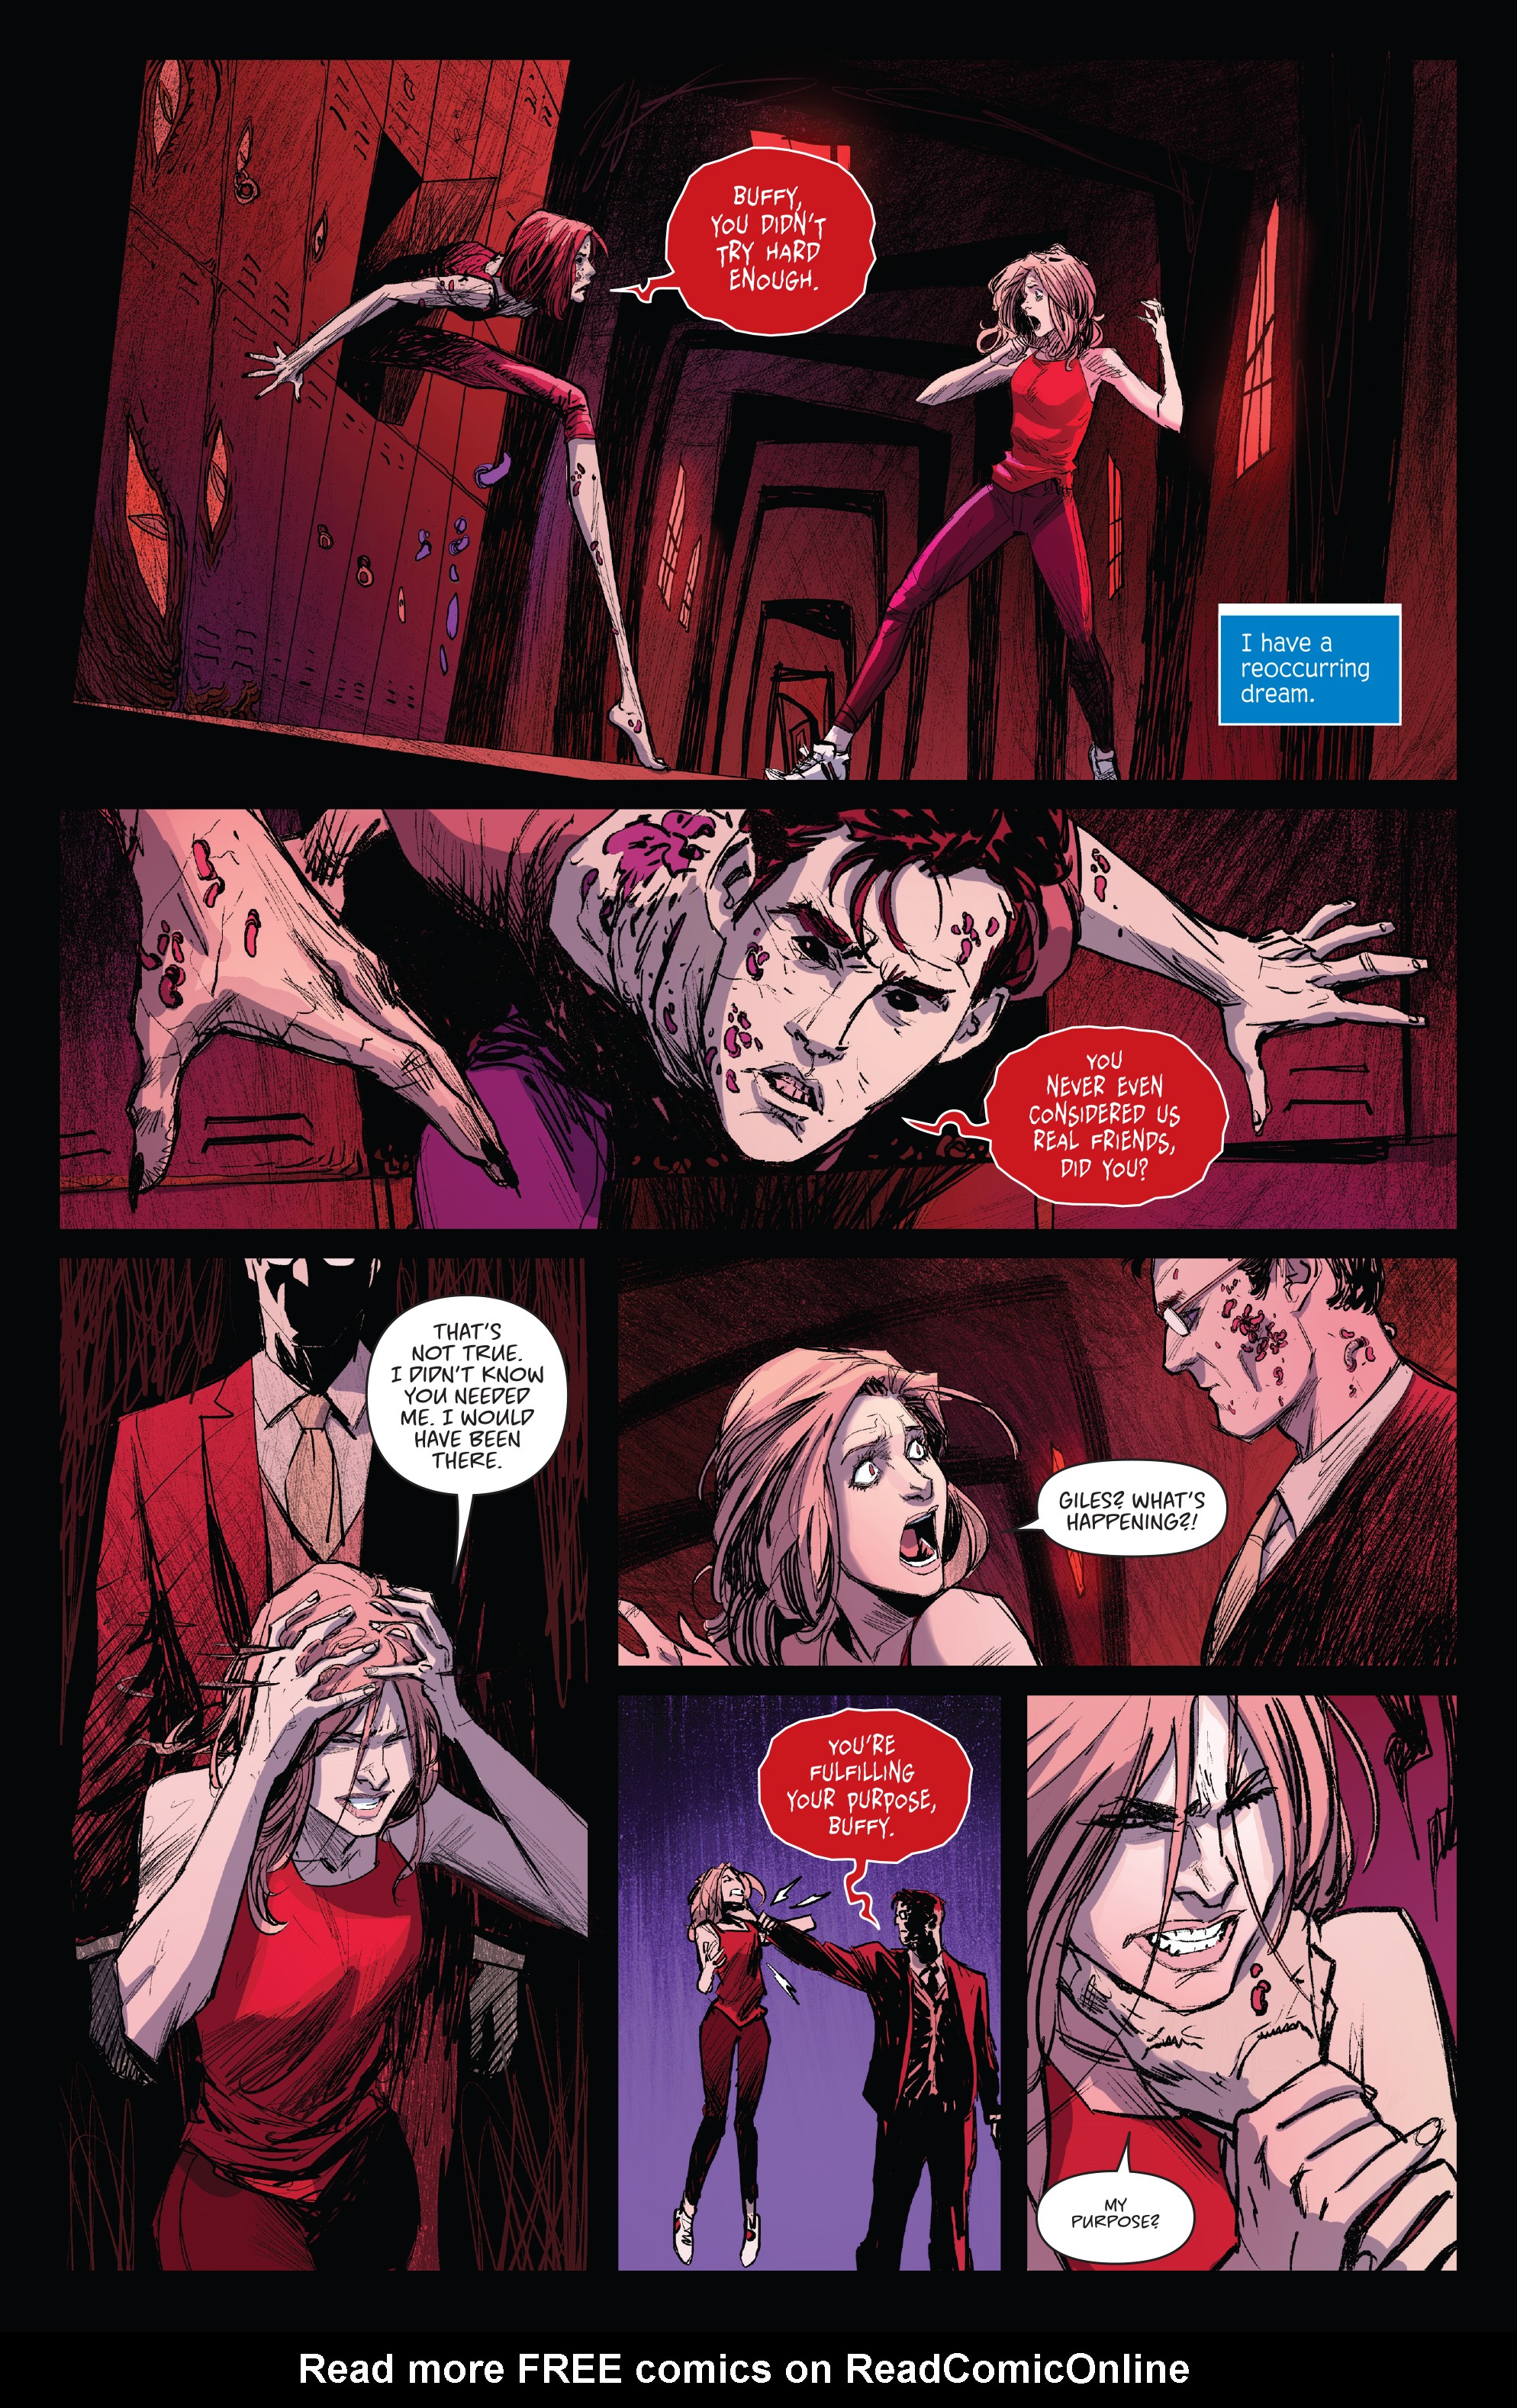 Buffy Lesbian Comic - Buffy The Vampire Slayer Issue 2 | Read Buffy The Vampire Slayer Issue 2  comic online in high quality. Read Full Comic online for free - Read comics  online in high quality .| READ COMIC ONLINE